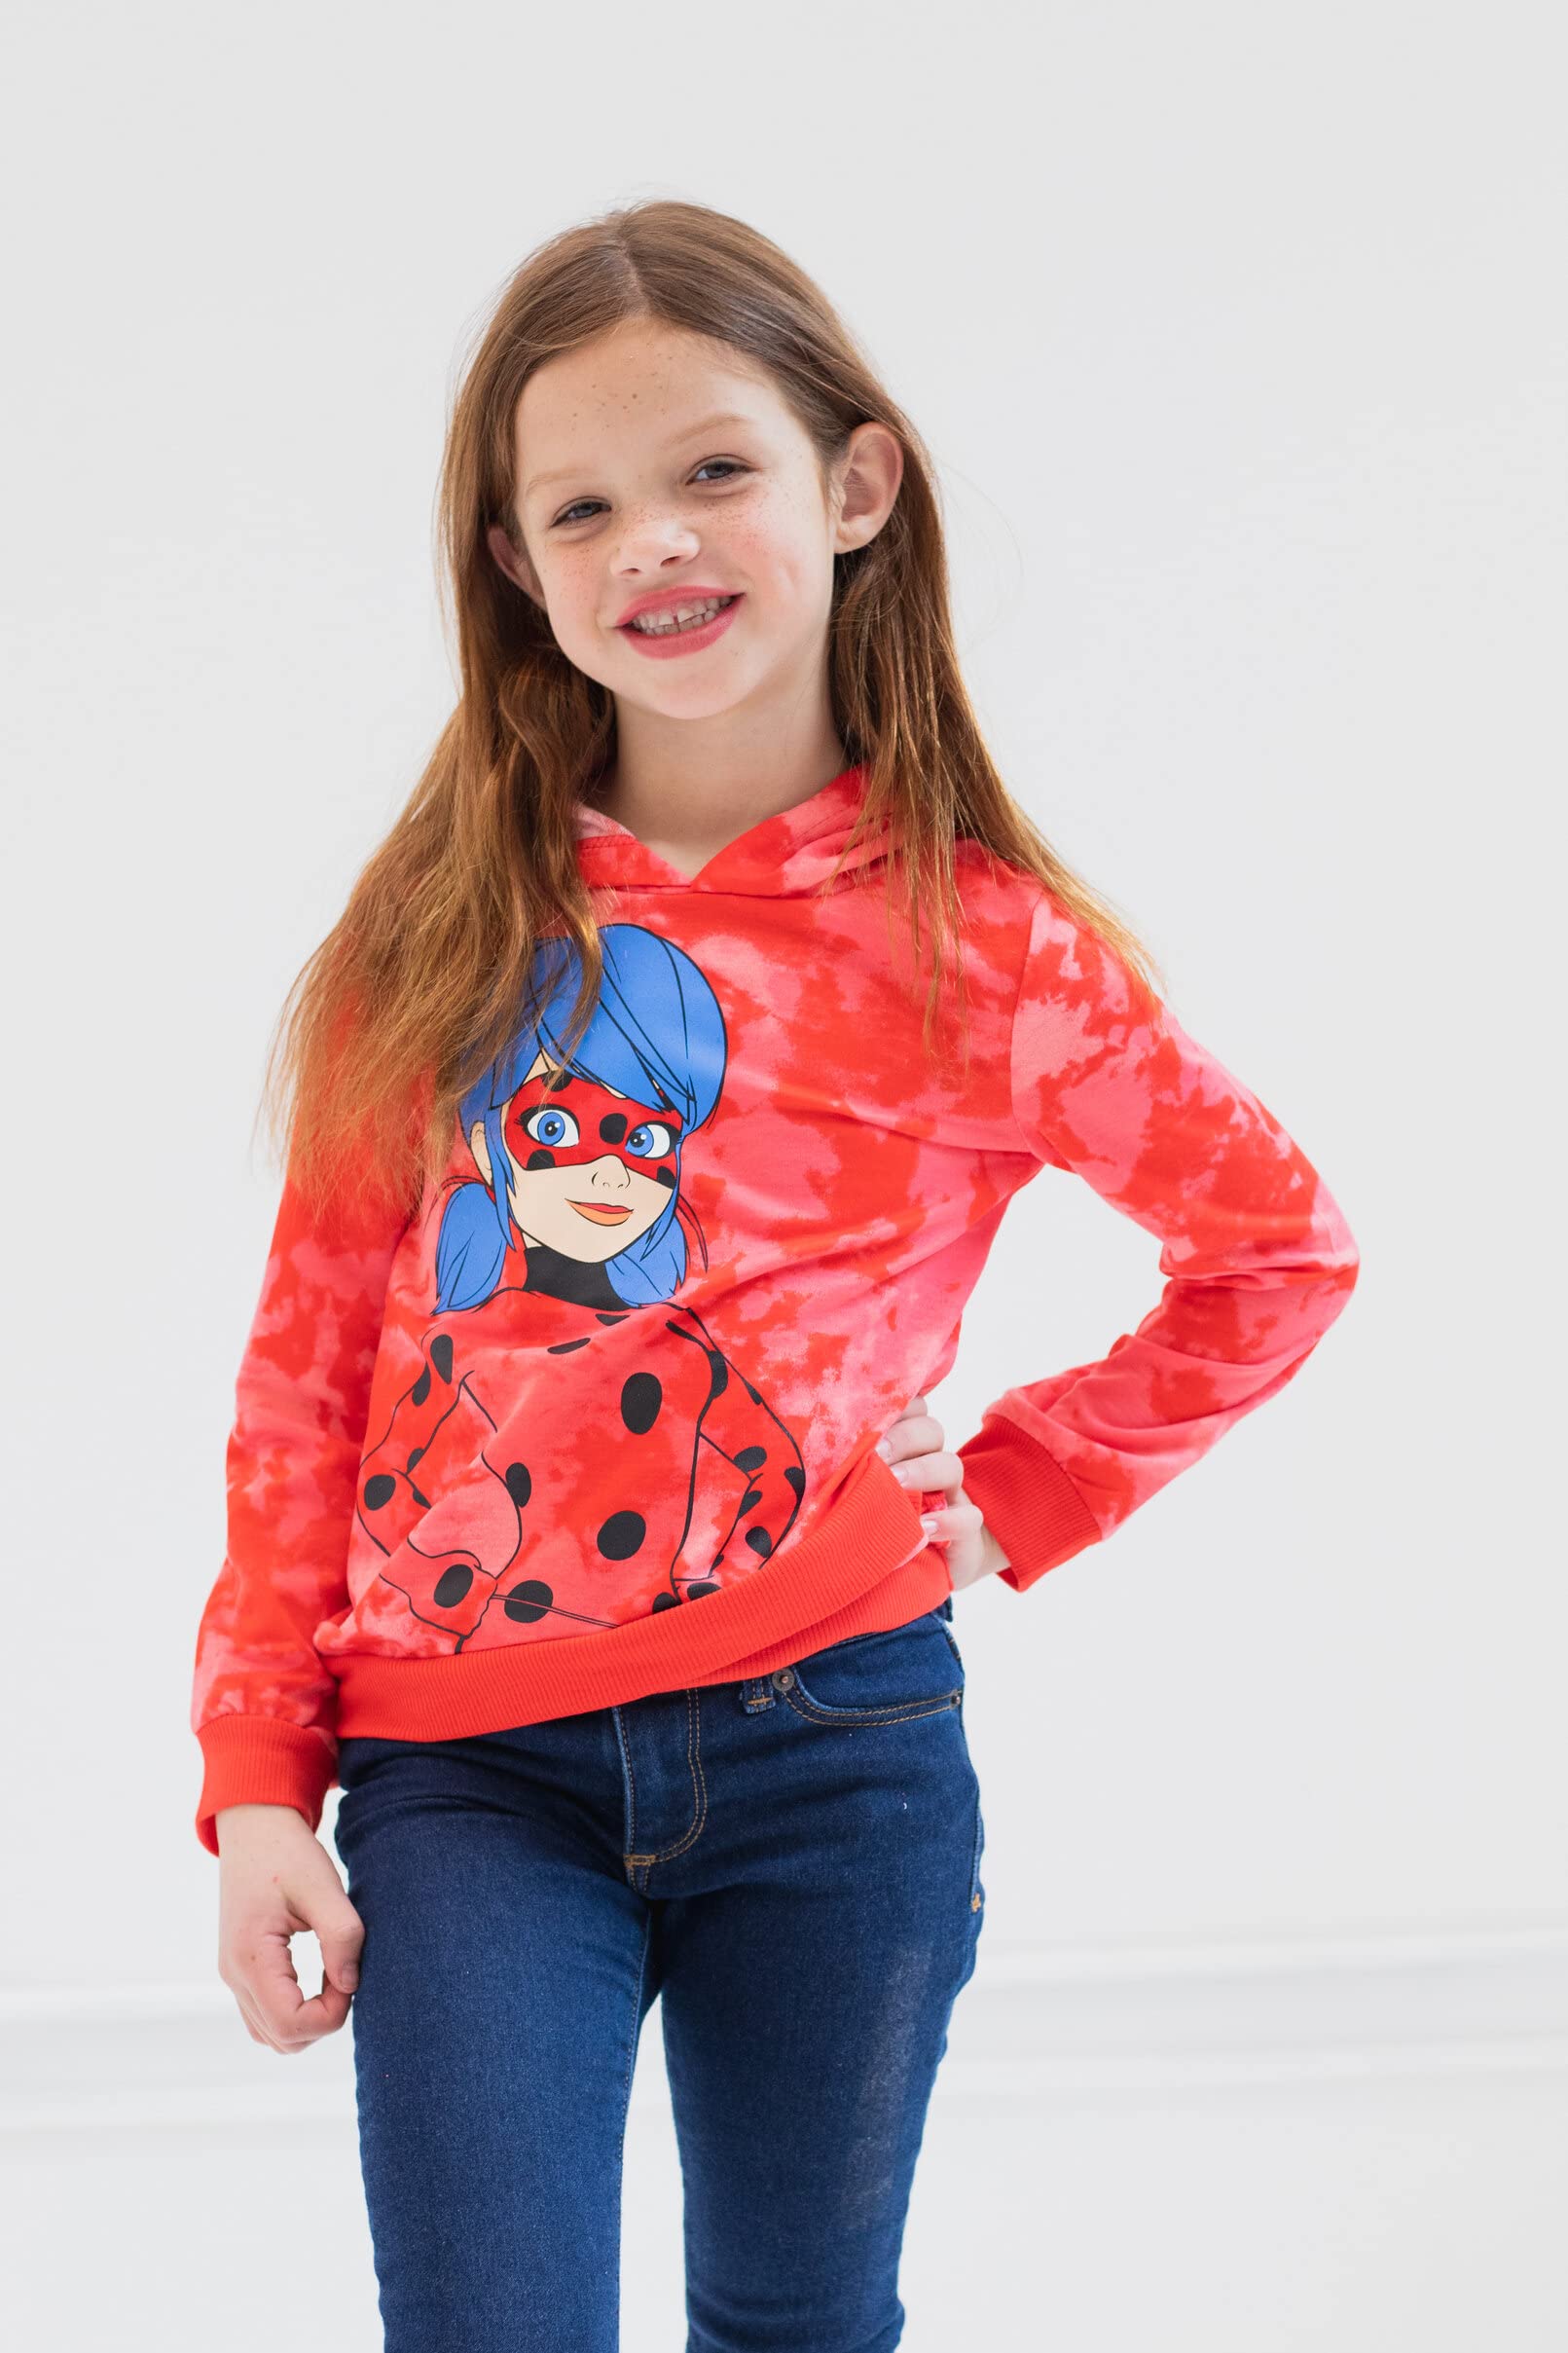 Miraculous Ladybug Little Girls French Terry Hoodie Red 4-5